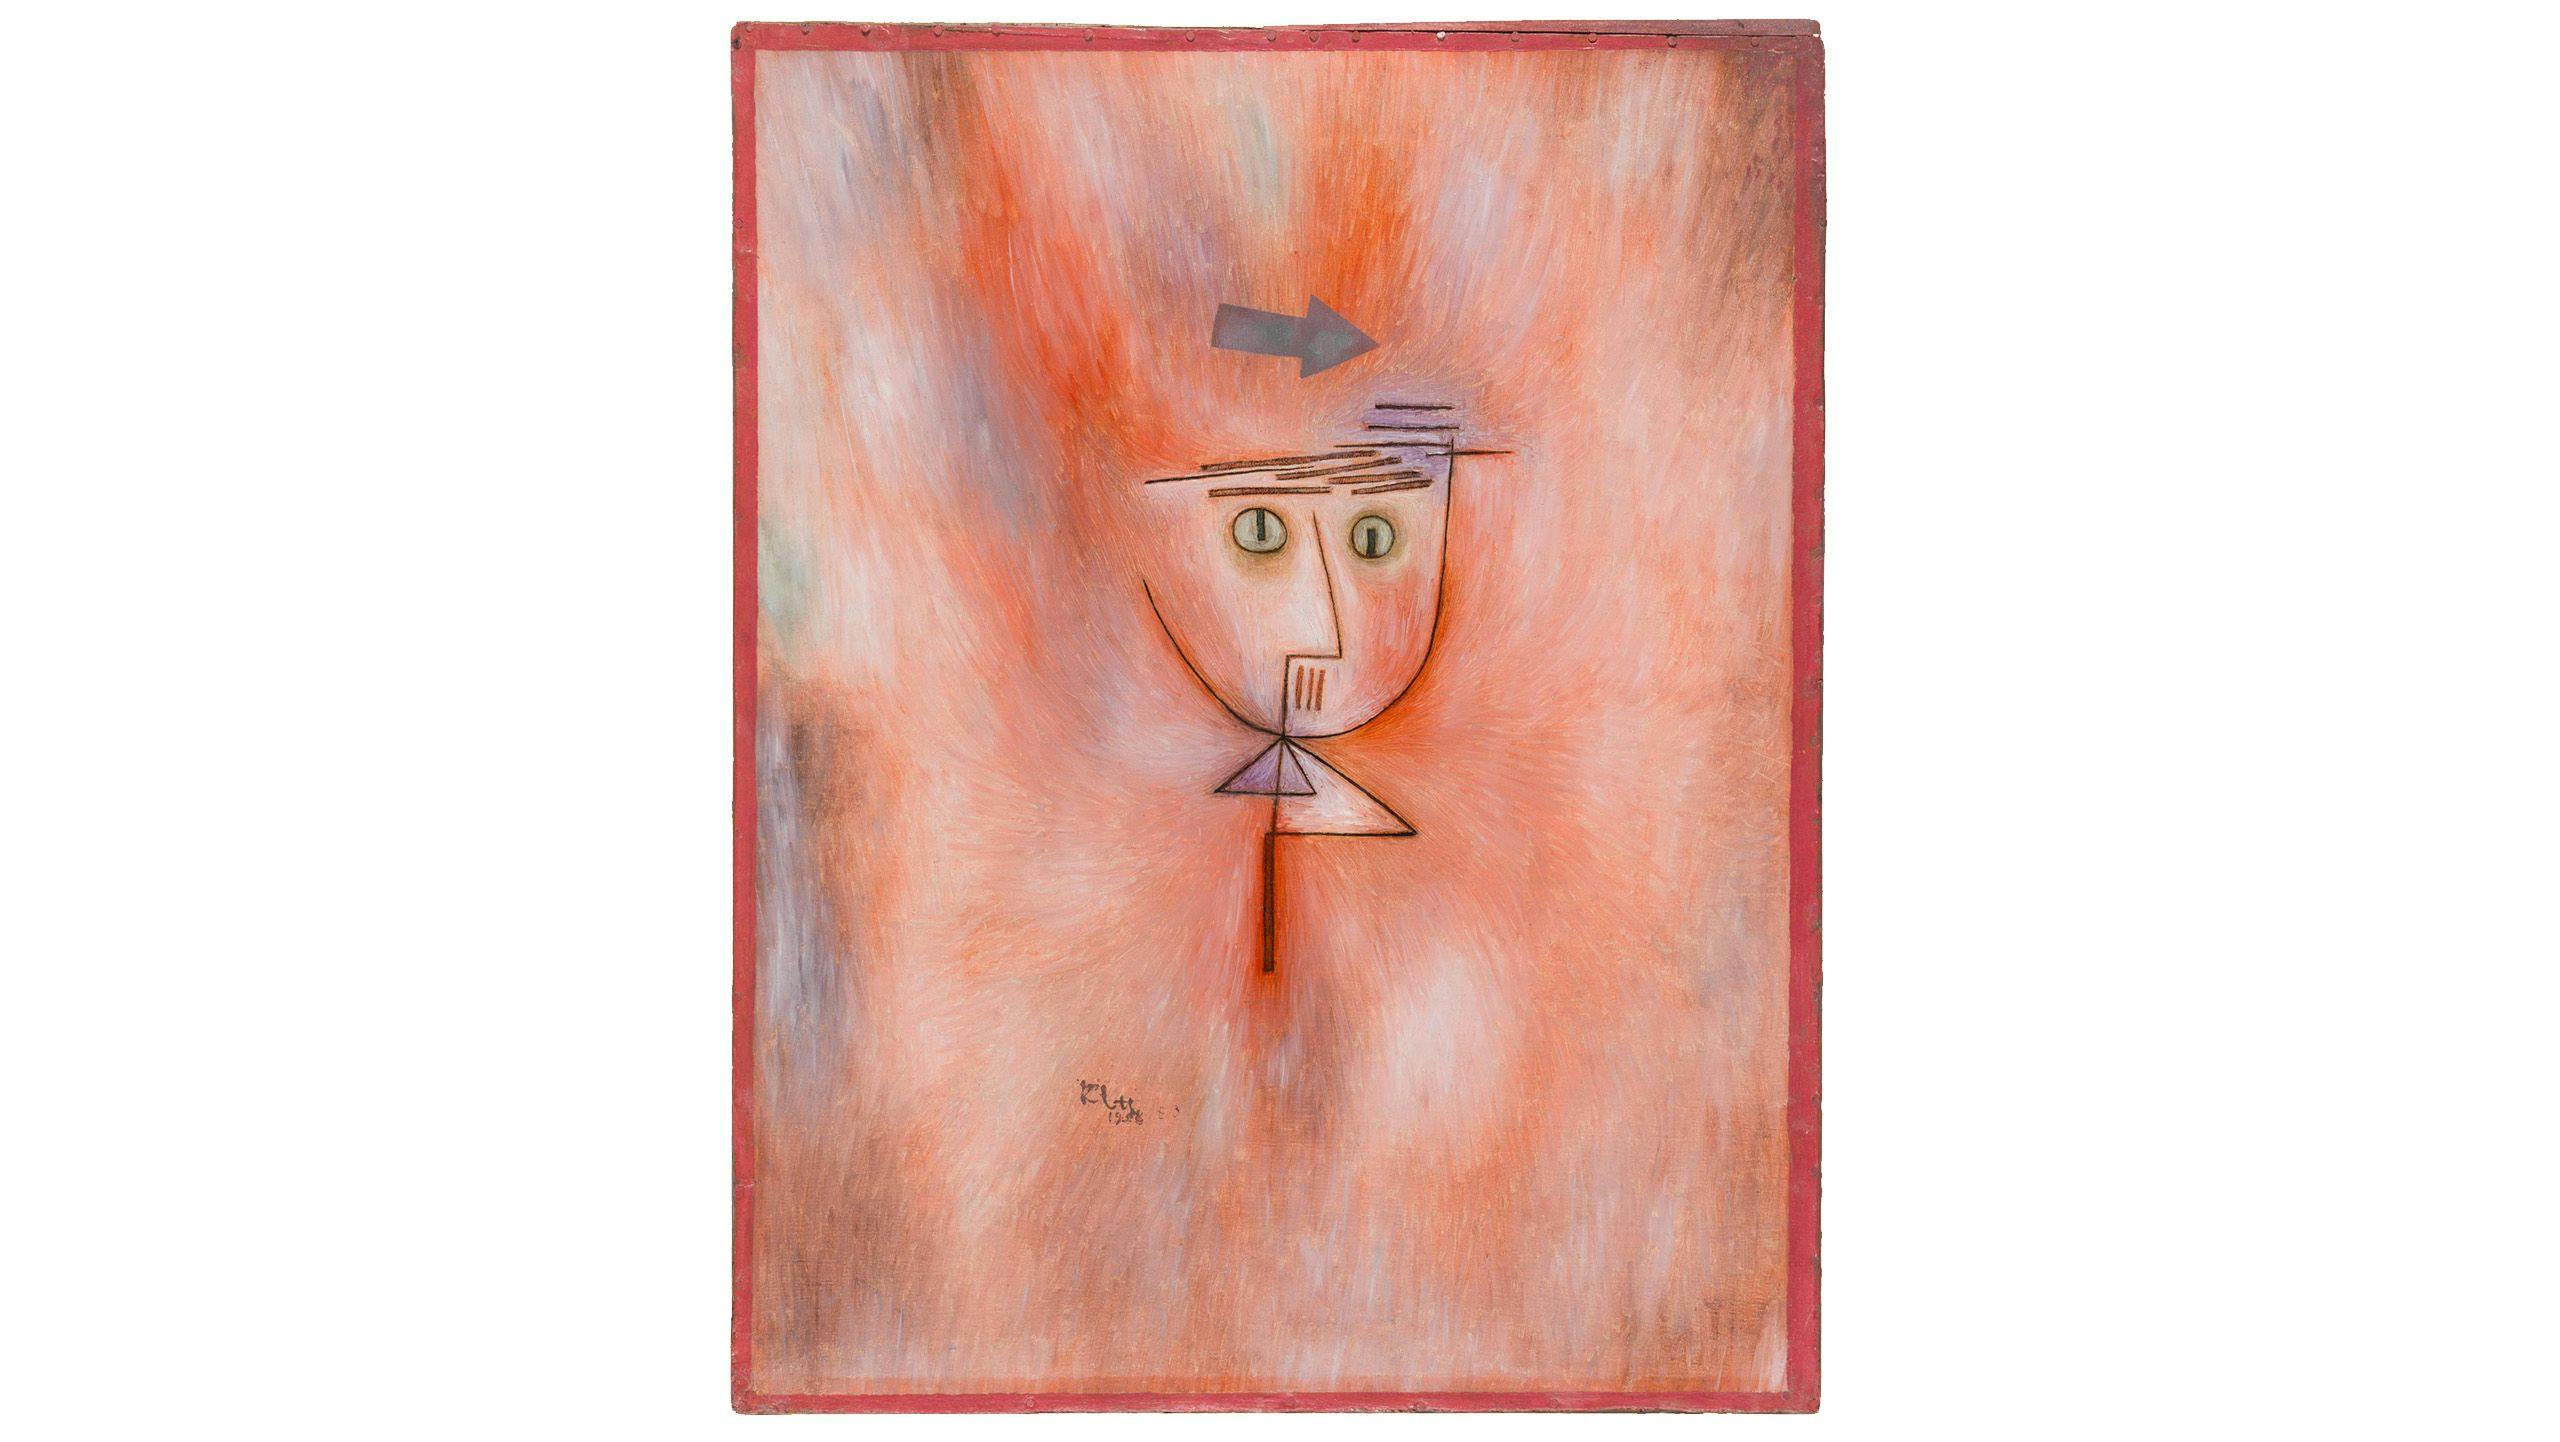 A painting by Paul Klee, titled Fast getroffen (Nearly Hit), dated 1928